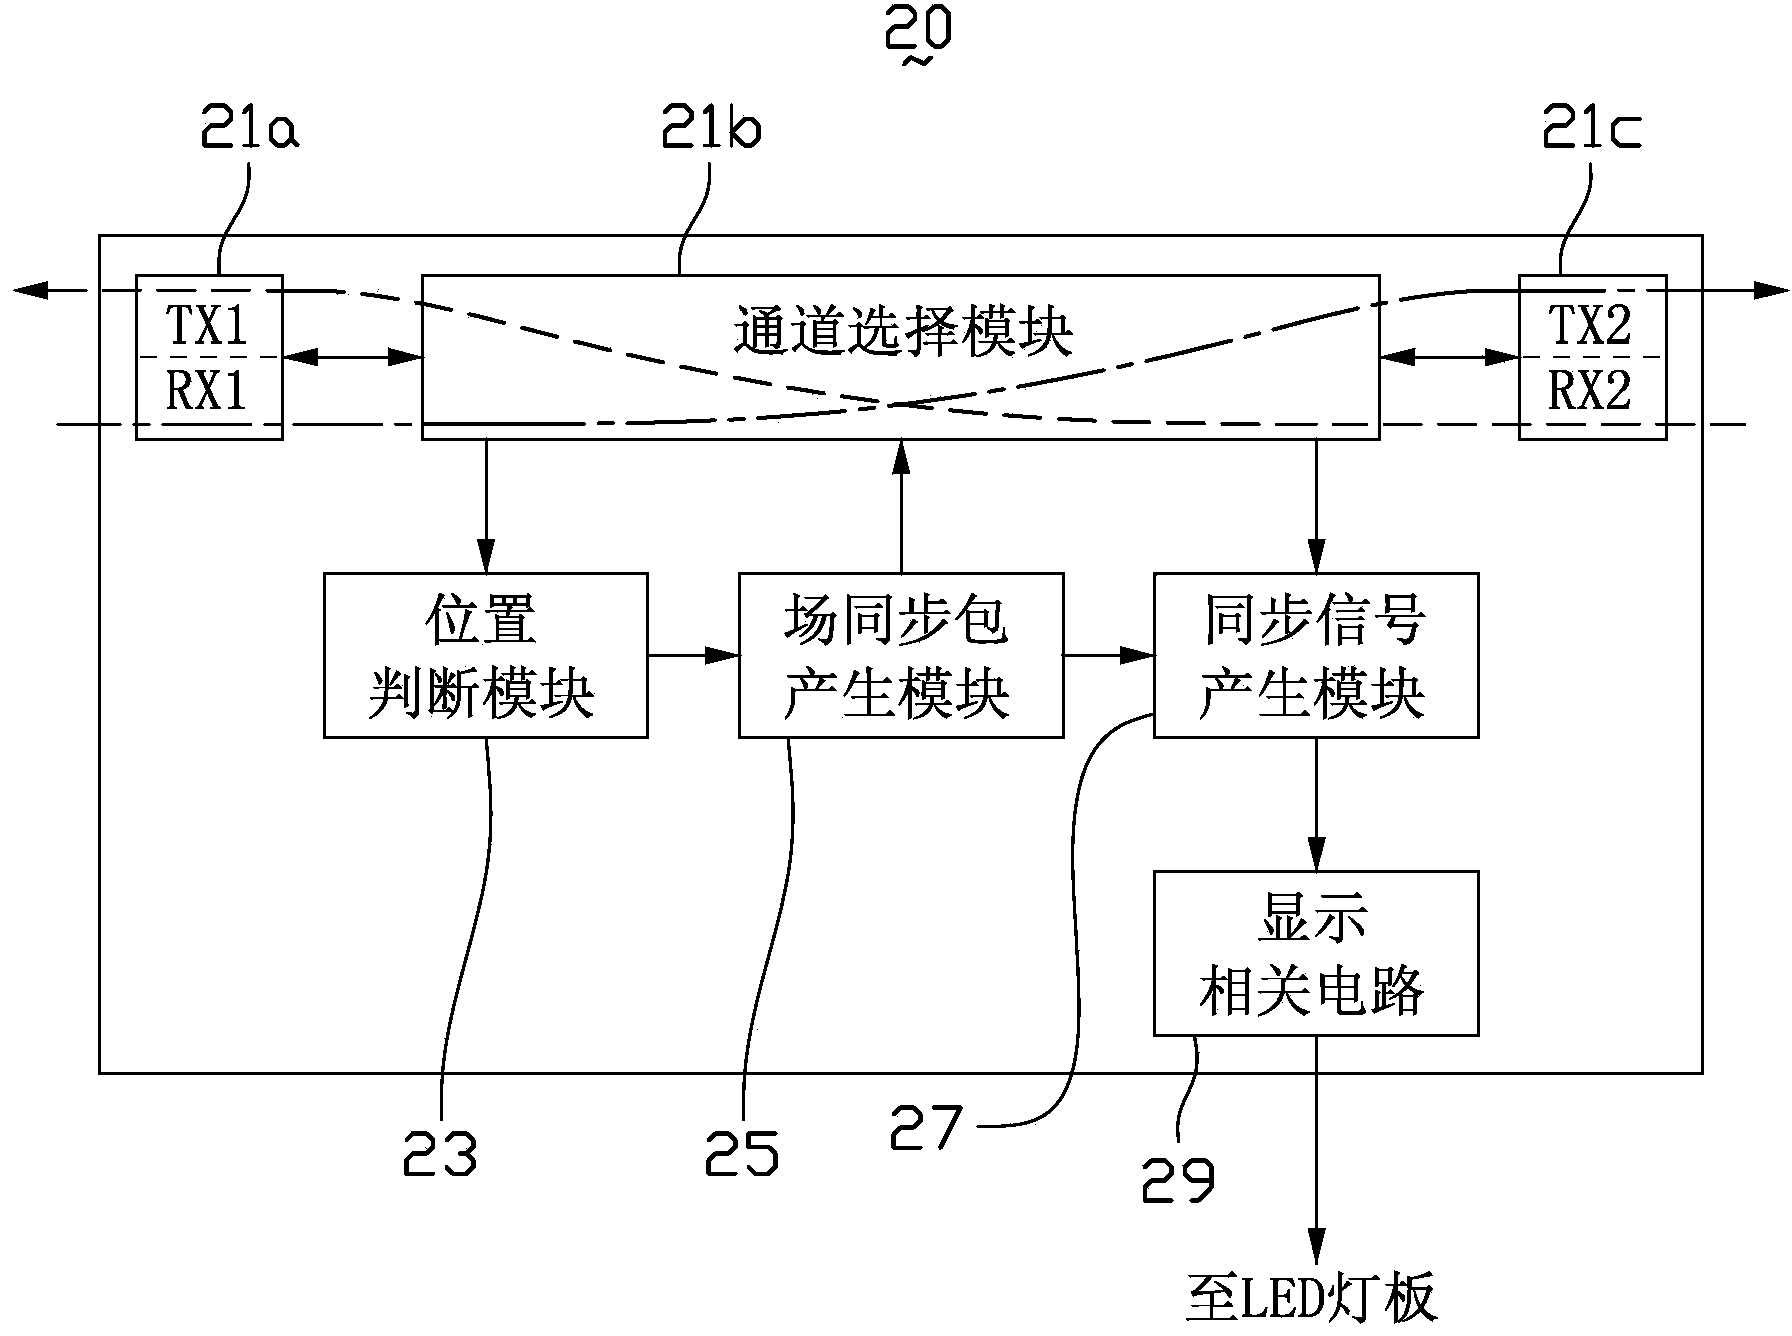 Display control card, receiving card array as well as relevant system and method